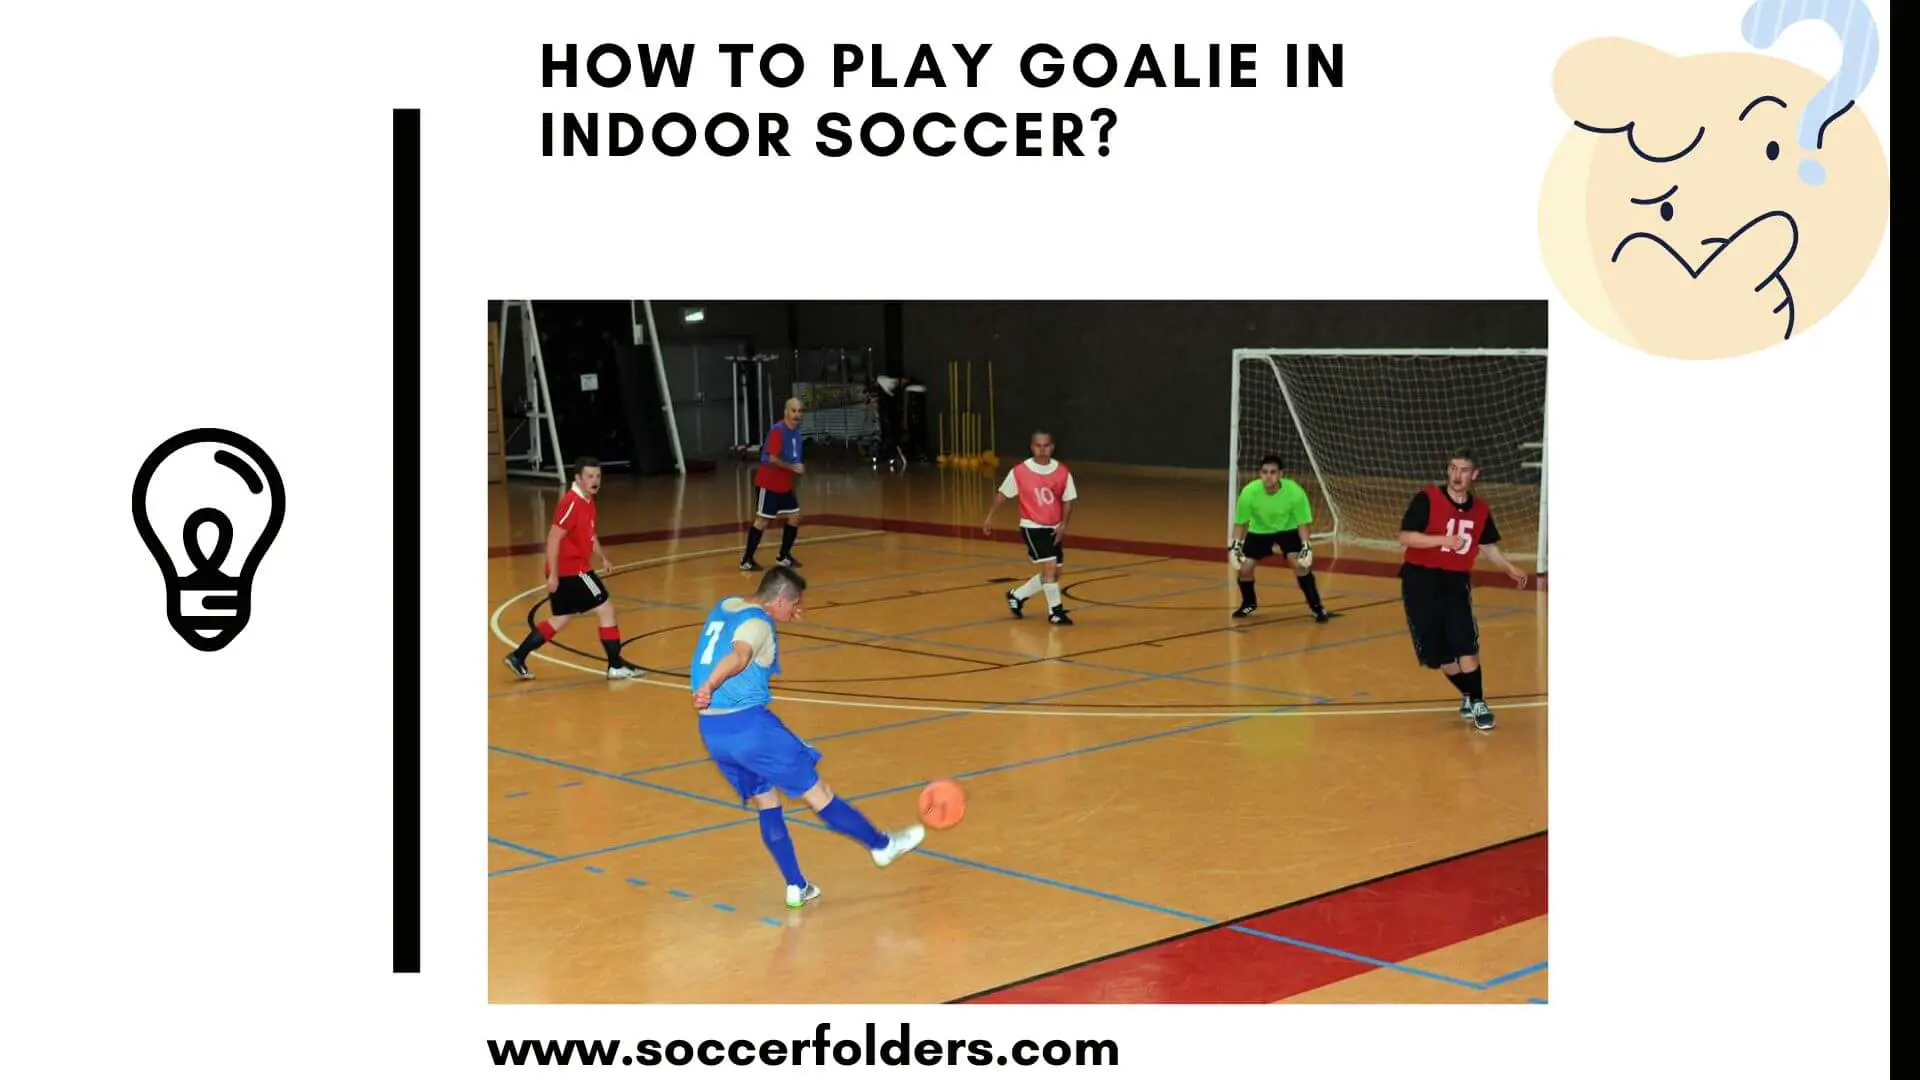 How to play goalie in indoor soccer - Featured image